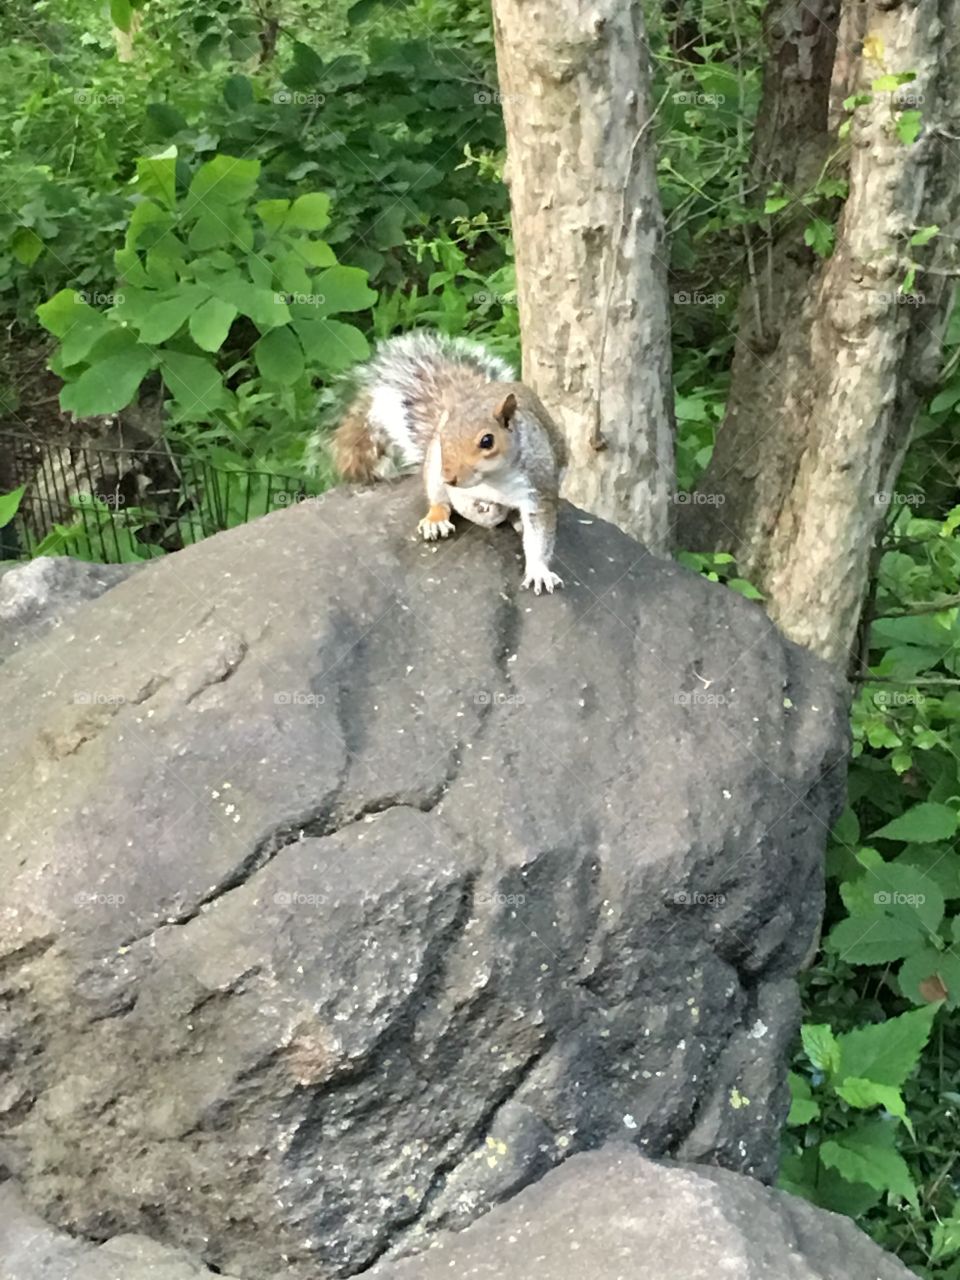 Squirrel on a rock at Central Park in New York City.